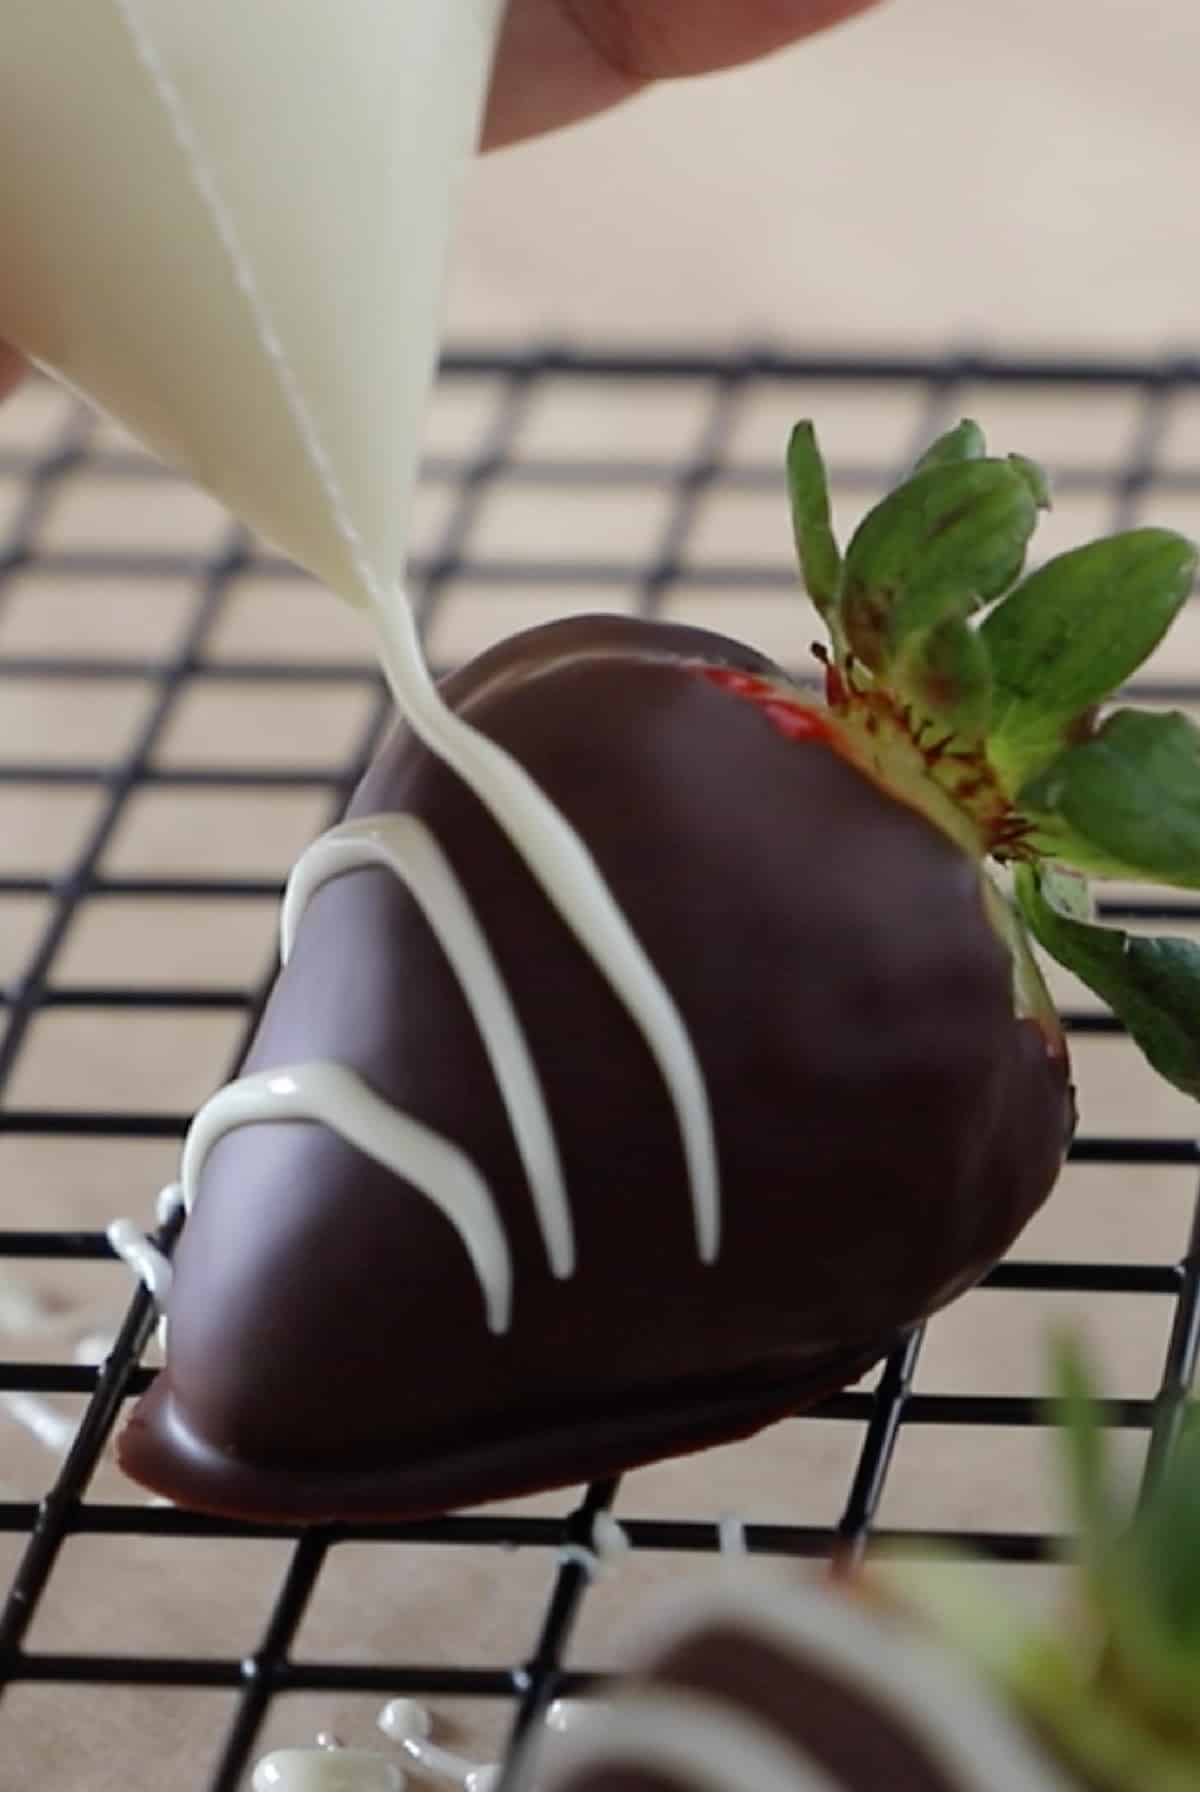 An images showing how to decorate chocolate strawberries.